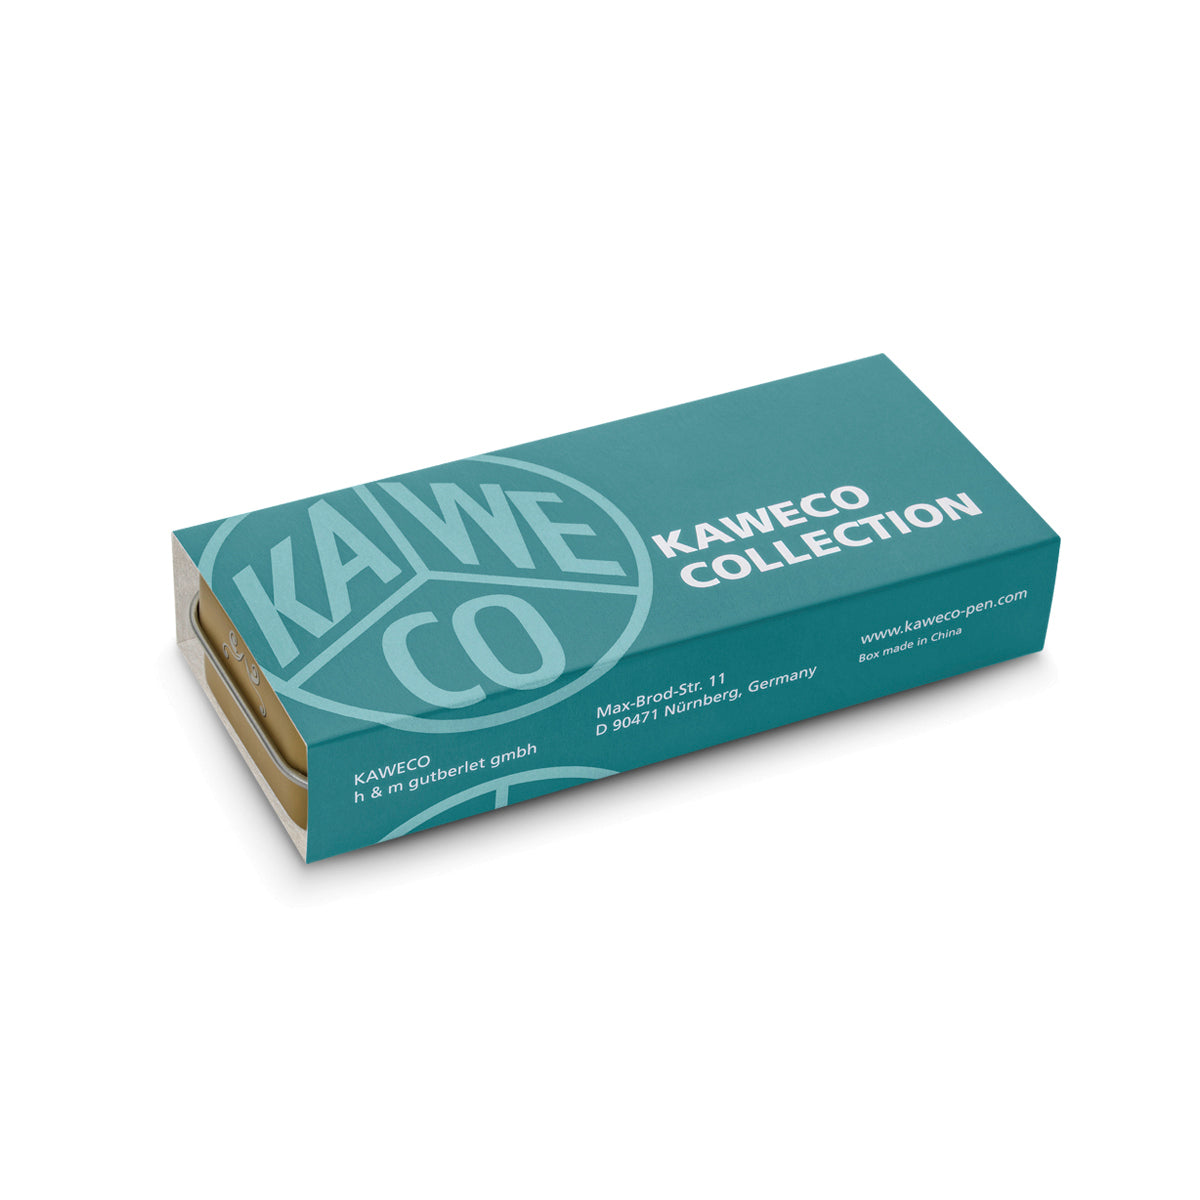 Tin box wrapped in a blue-green paper sleeve. The sleeve displays a 'KAWECO' logo and white text that reads 'KAWECO COLLECTION'.